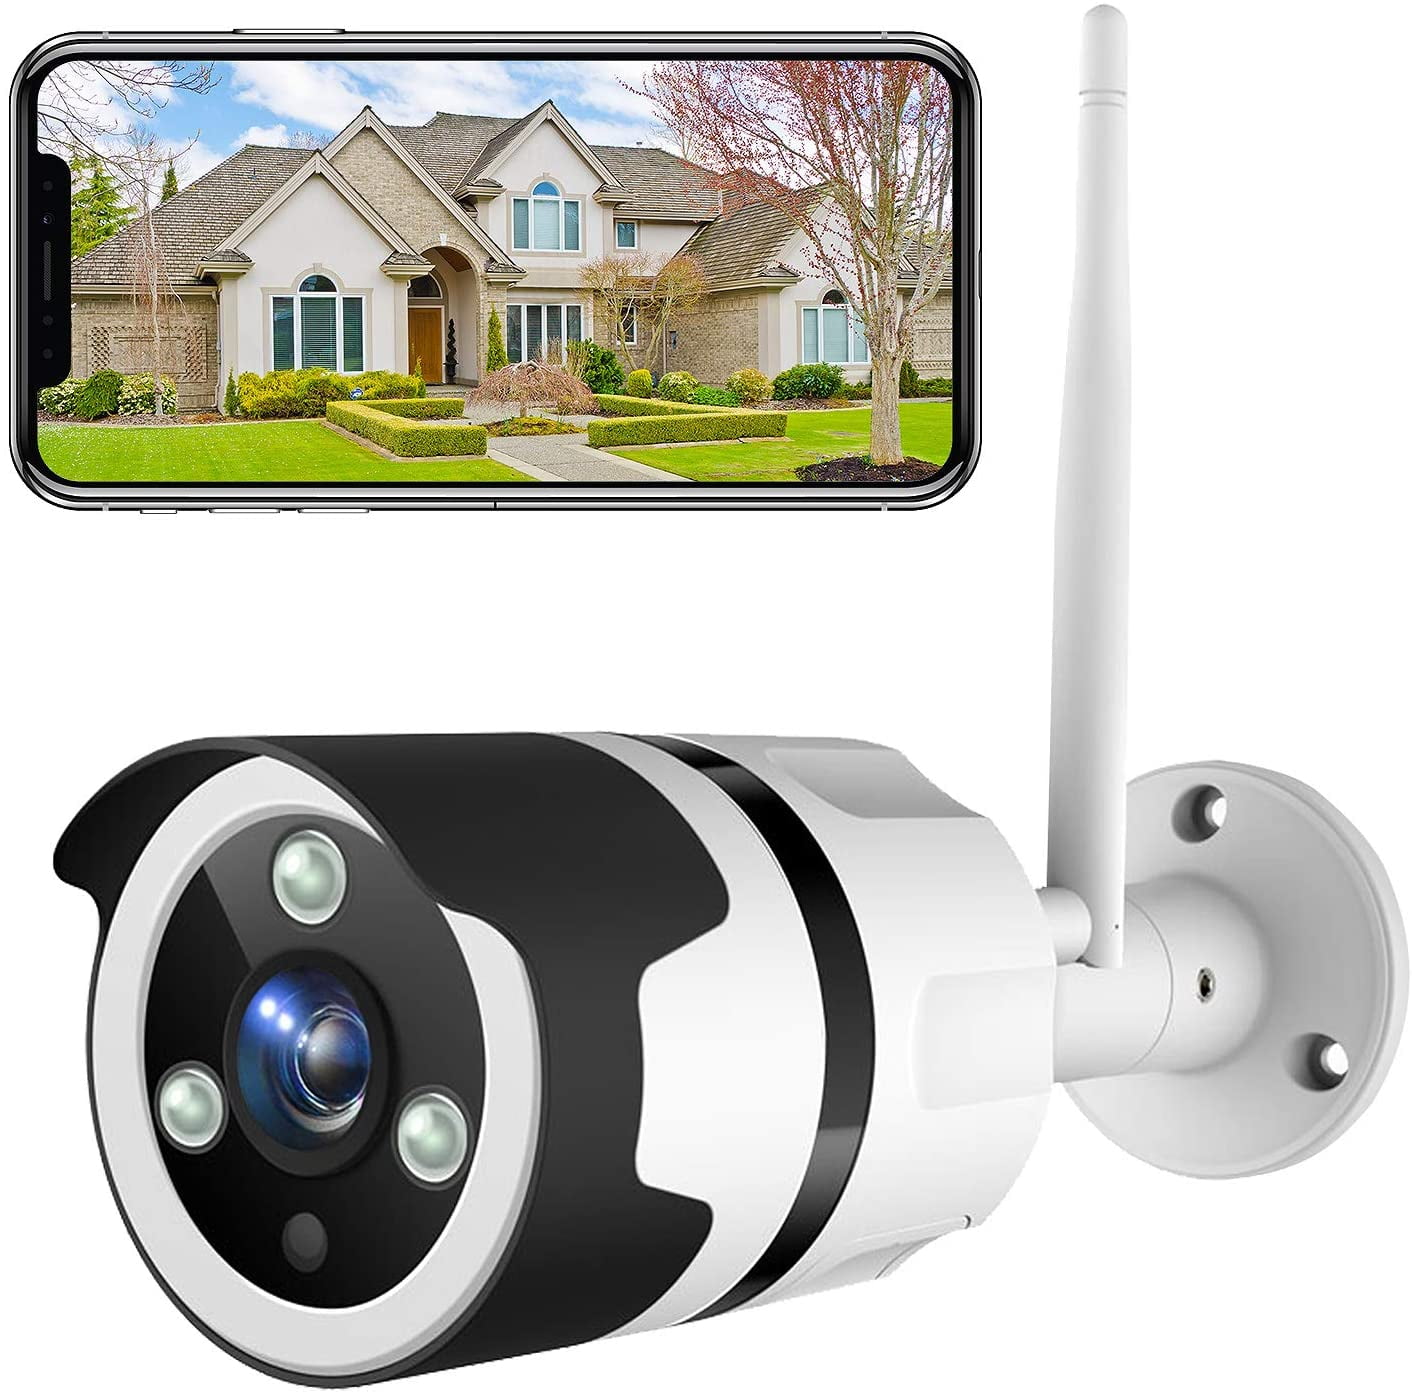 Secure Your Property: Outdoor WiFi Surveillance Camera with Night ...